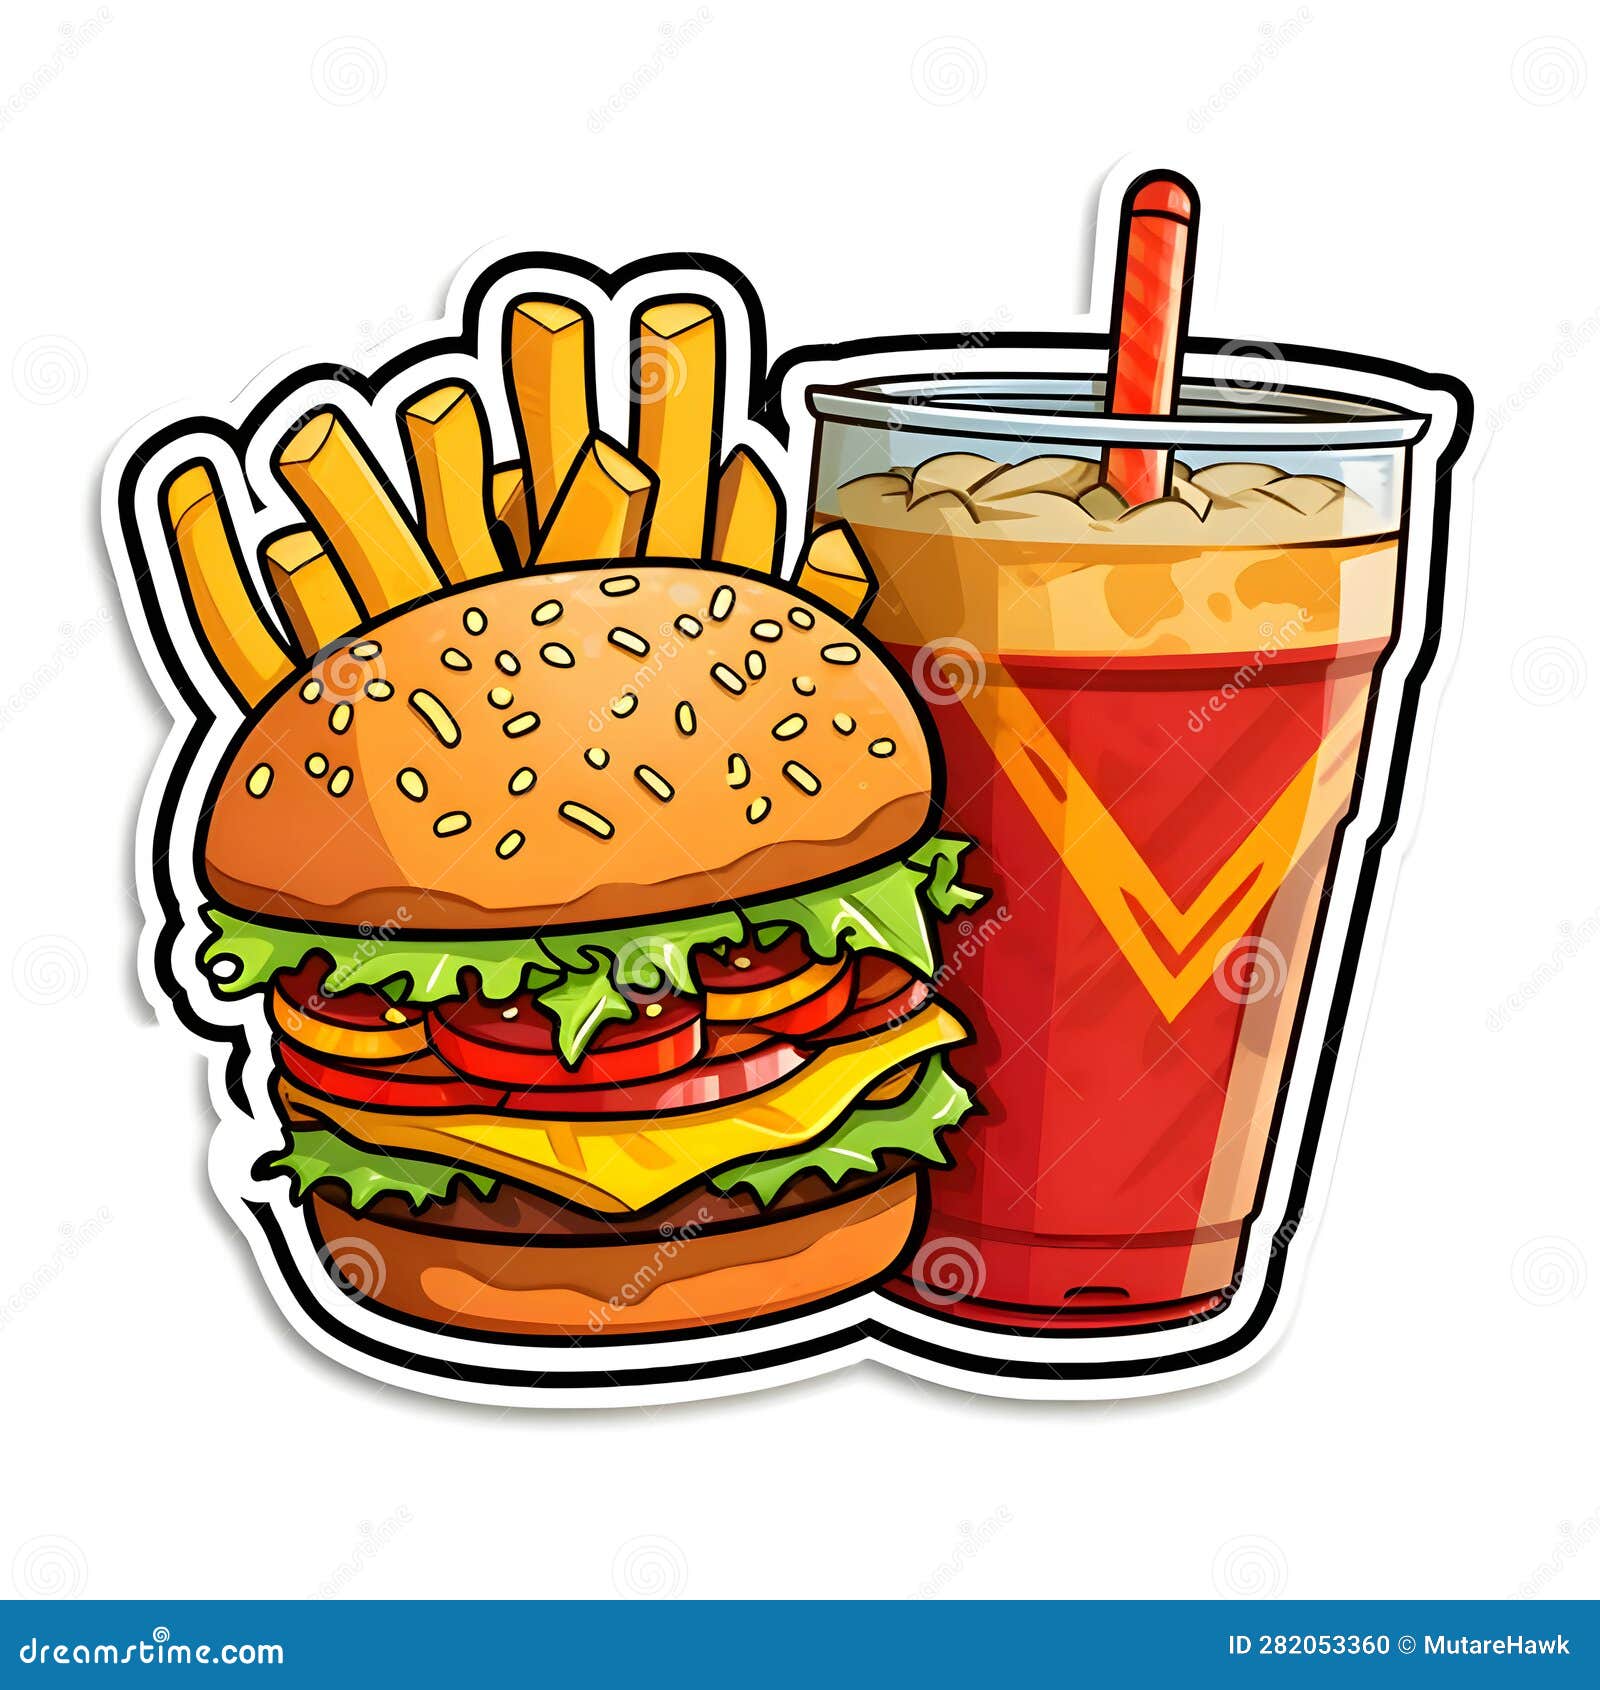 https://thumbs.dreamstime.com/z/sticker-logo-featuring-mouthwatering-hamburger-refreshing-coke-golden-fries-perfect-combination-deliciousness-282053360.jpg